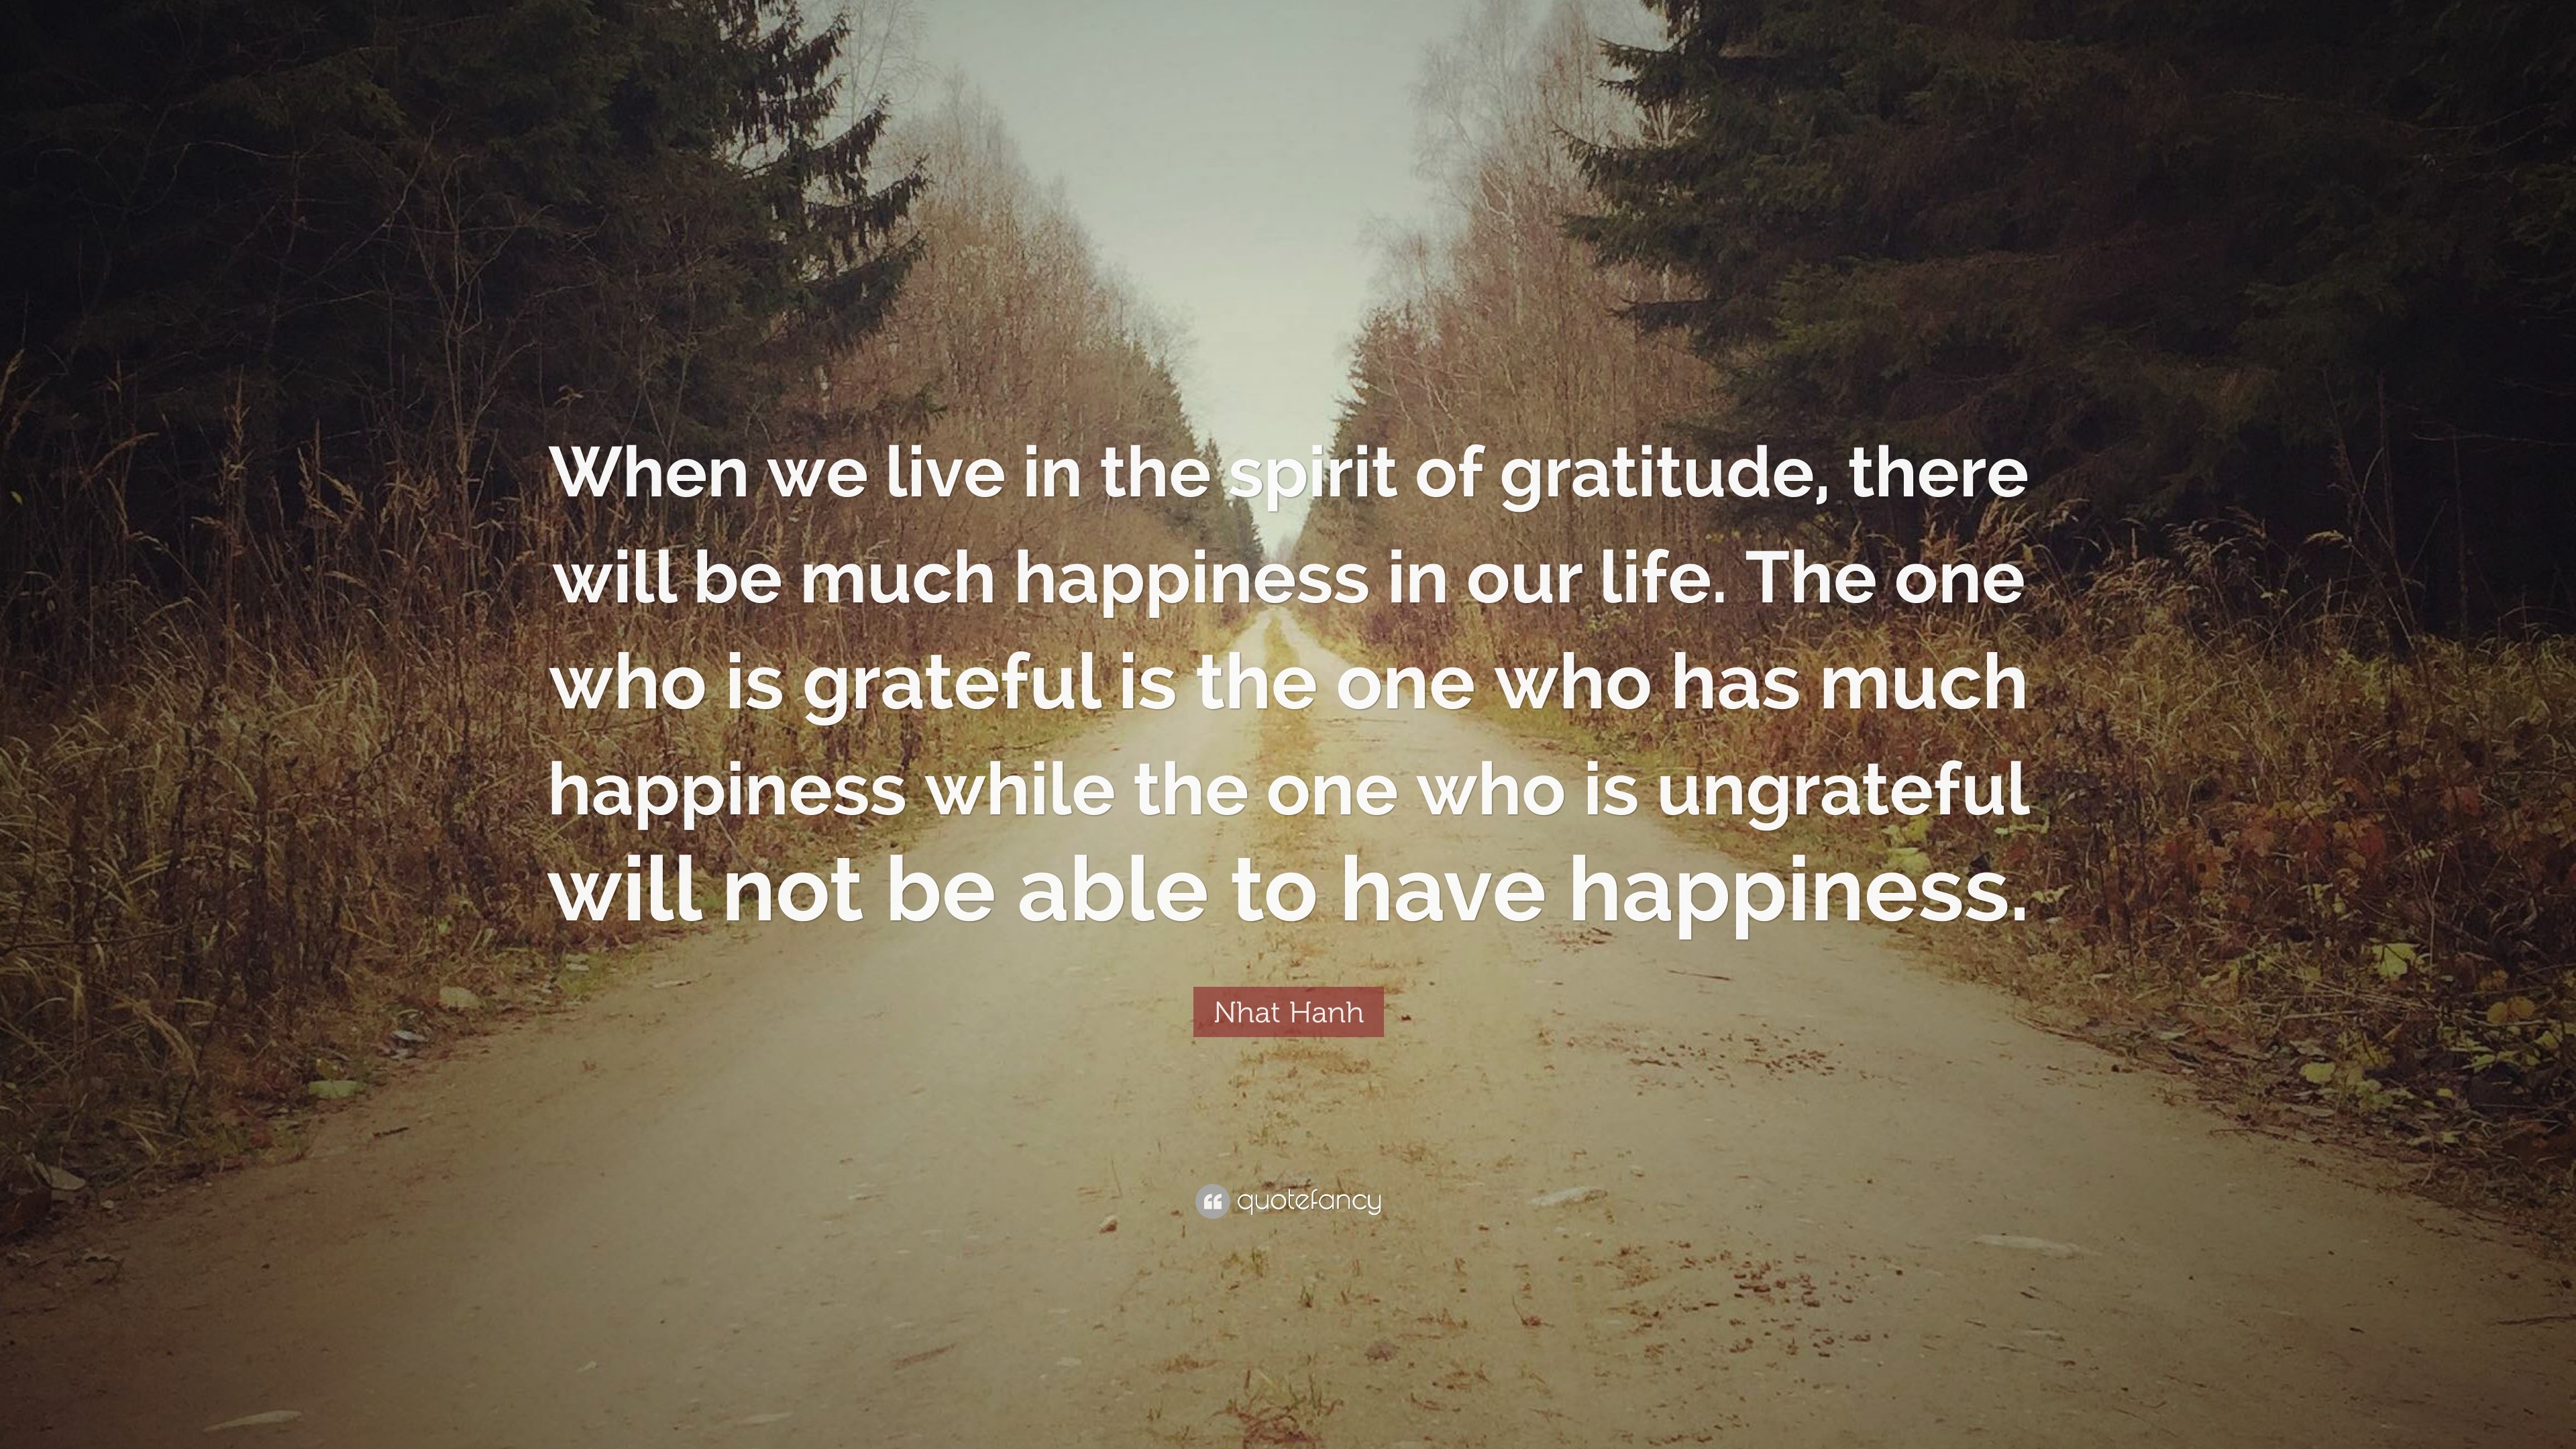 Nhat Hanh Quote When We Live In The Spirit Of Gratitude There Will Be Much Happiness In Our Life The One Who Is Grateful Is The One Wh 12 Wallpapers Quotefancy